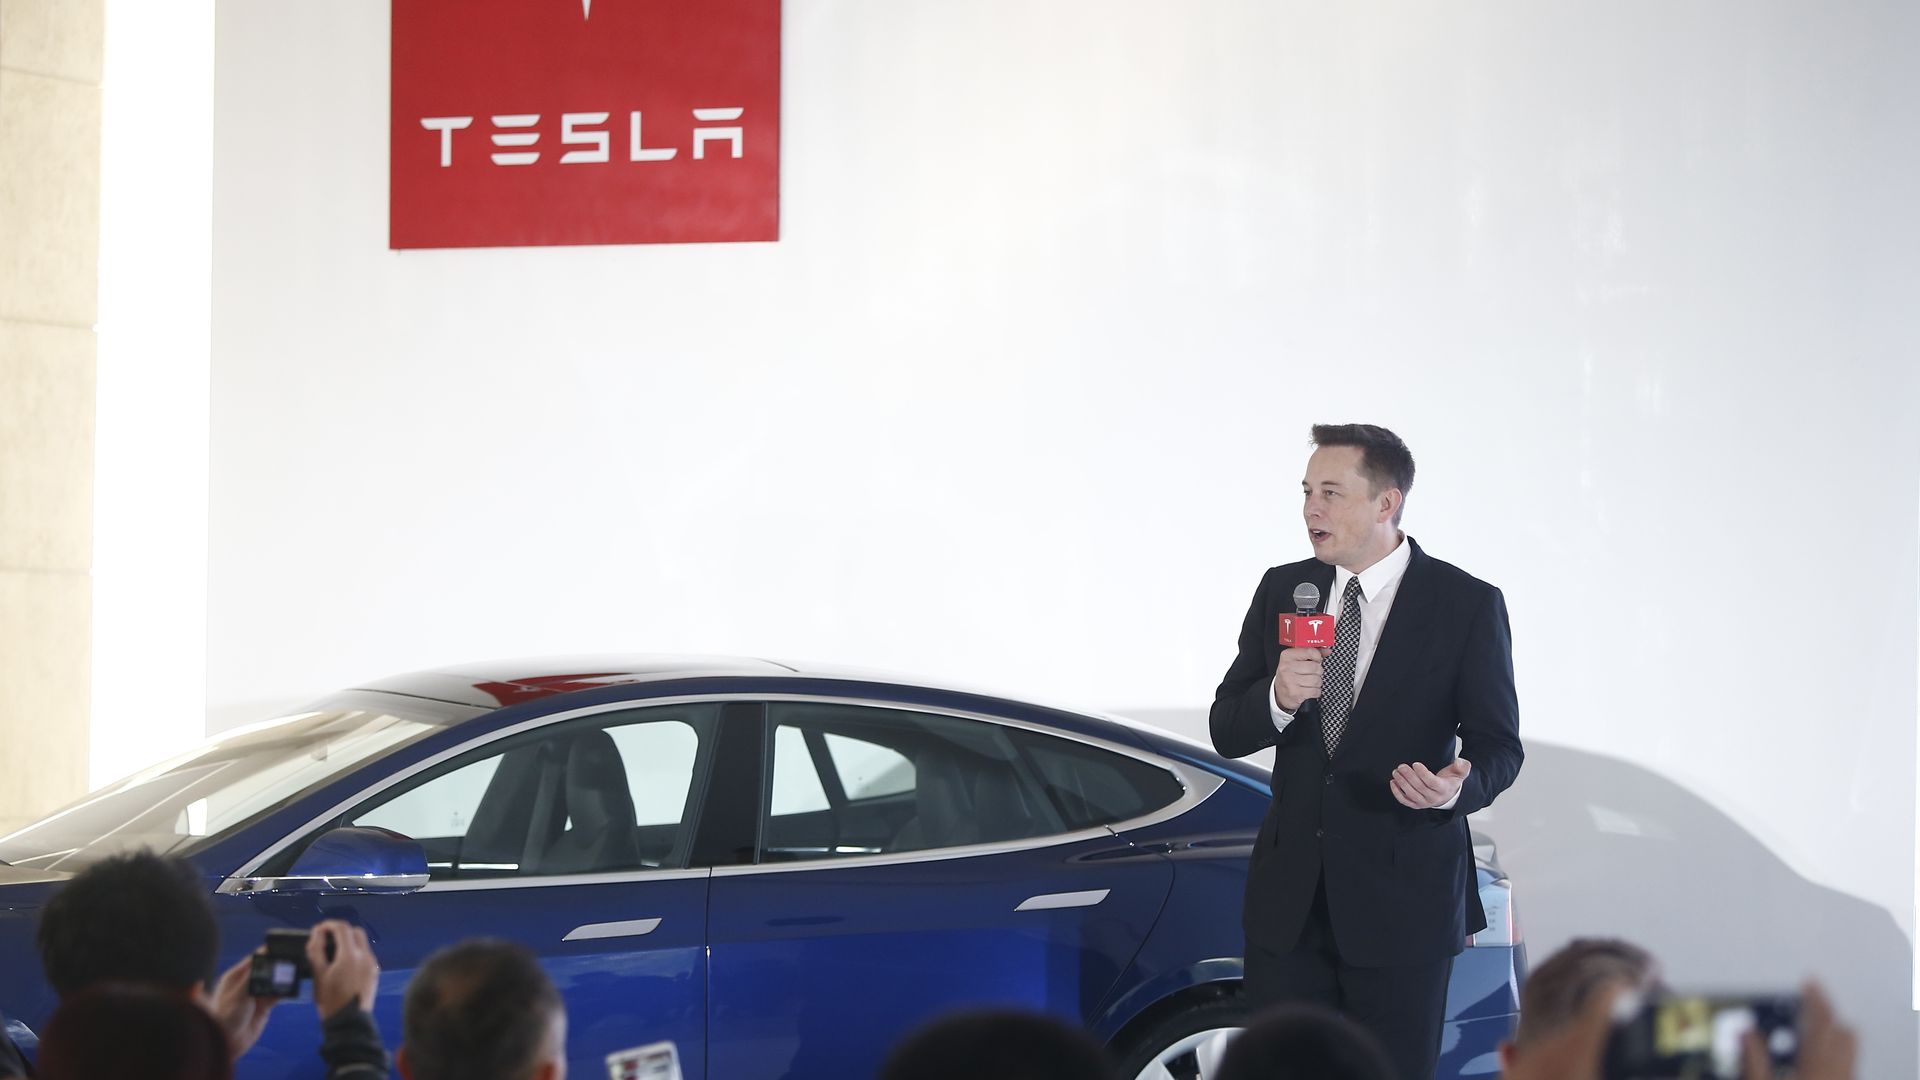 Tesla CEO Elon Musk speaking to a crowd in front of a Tesla car. 